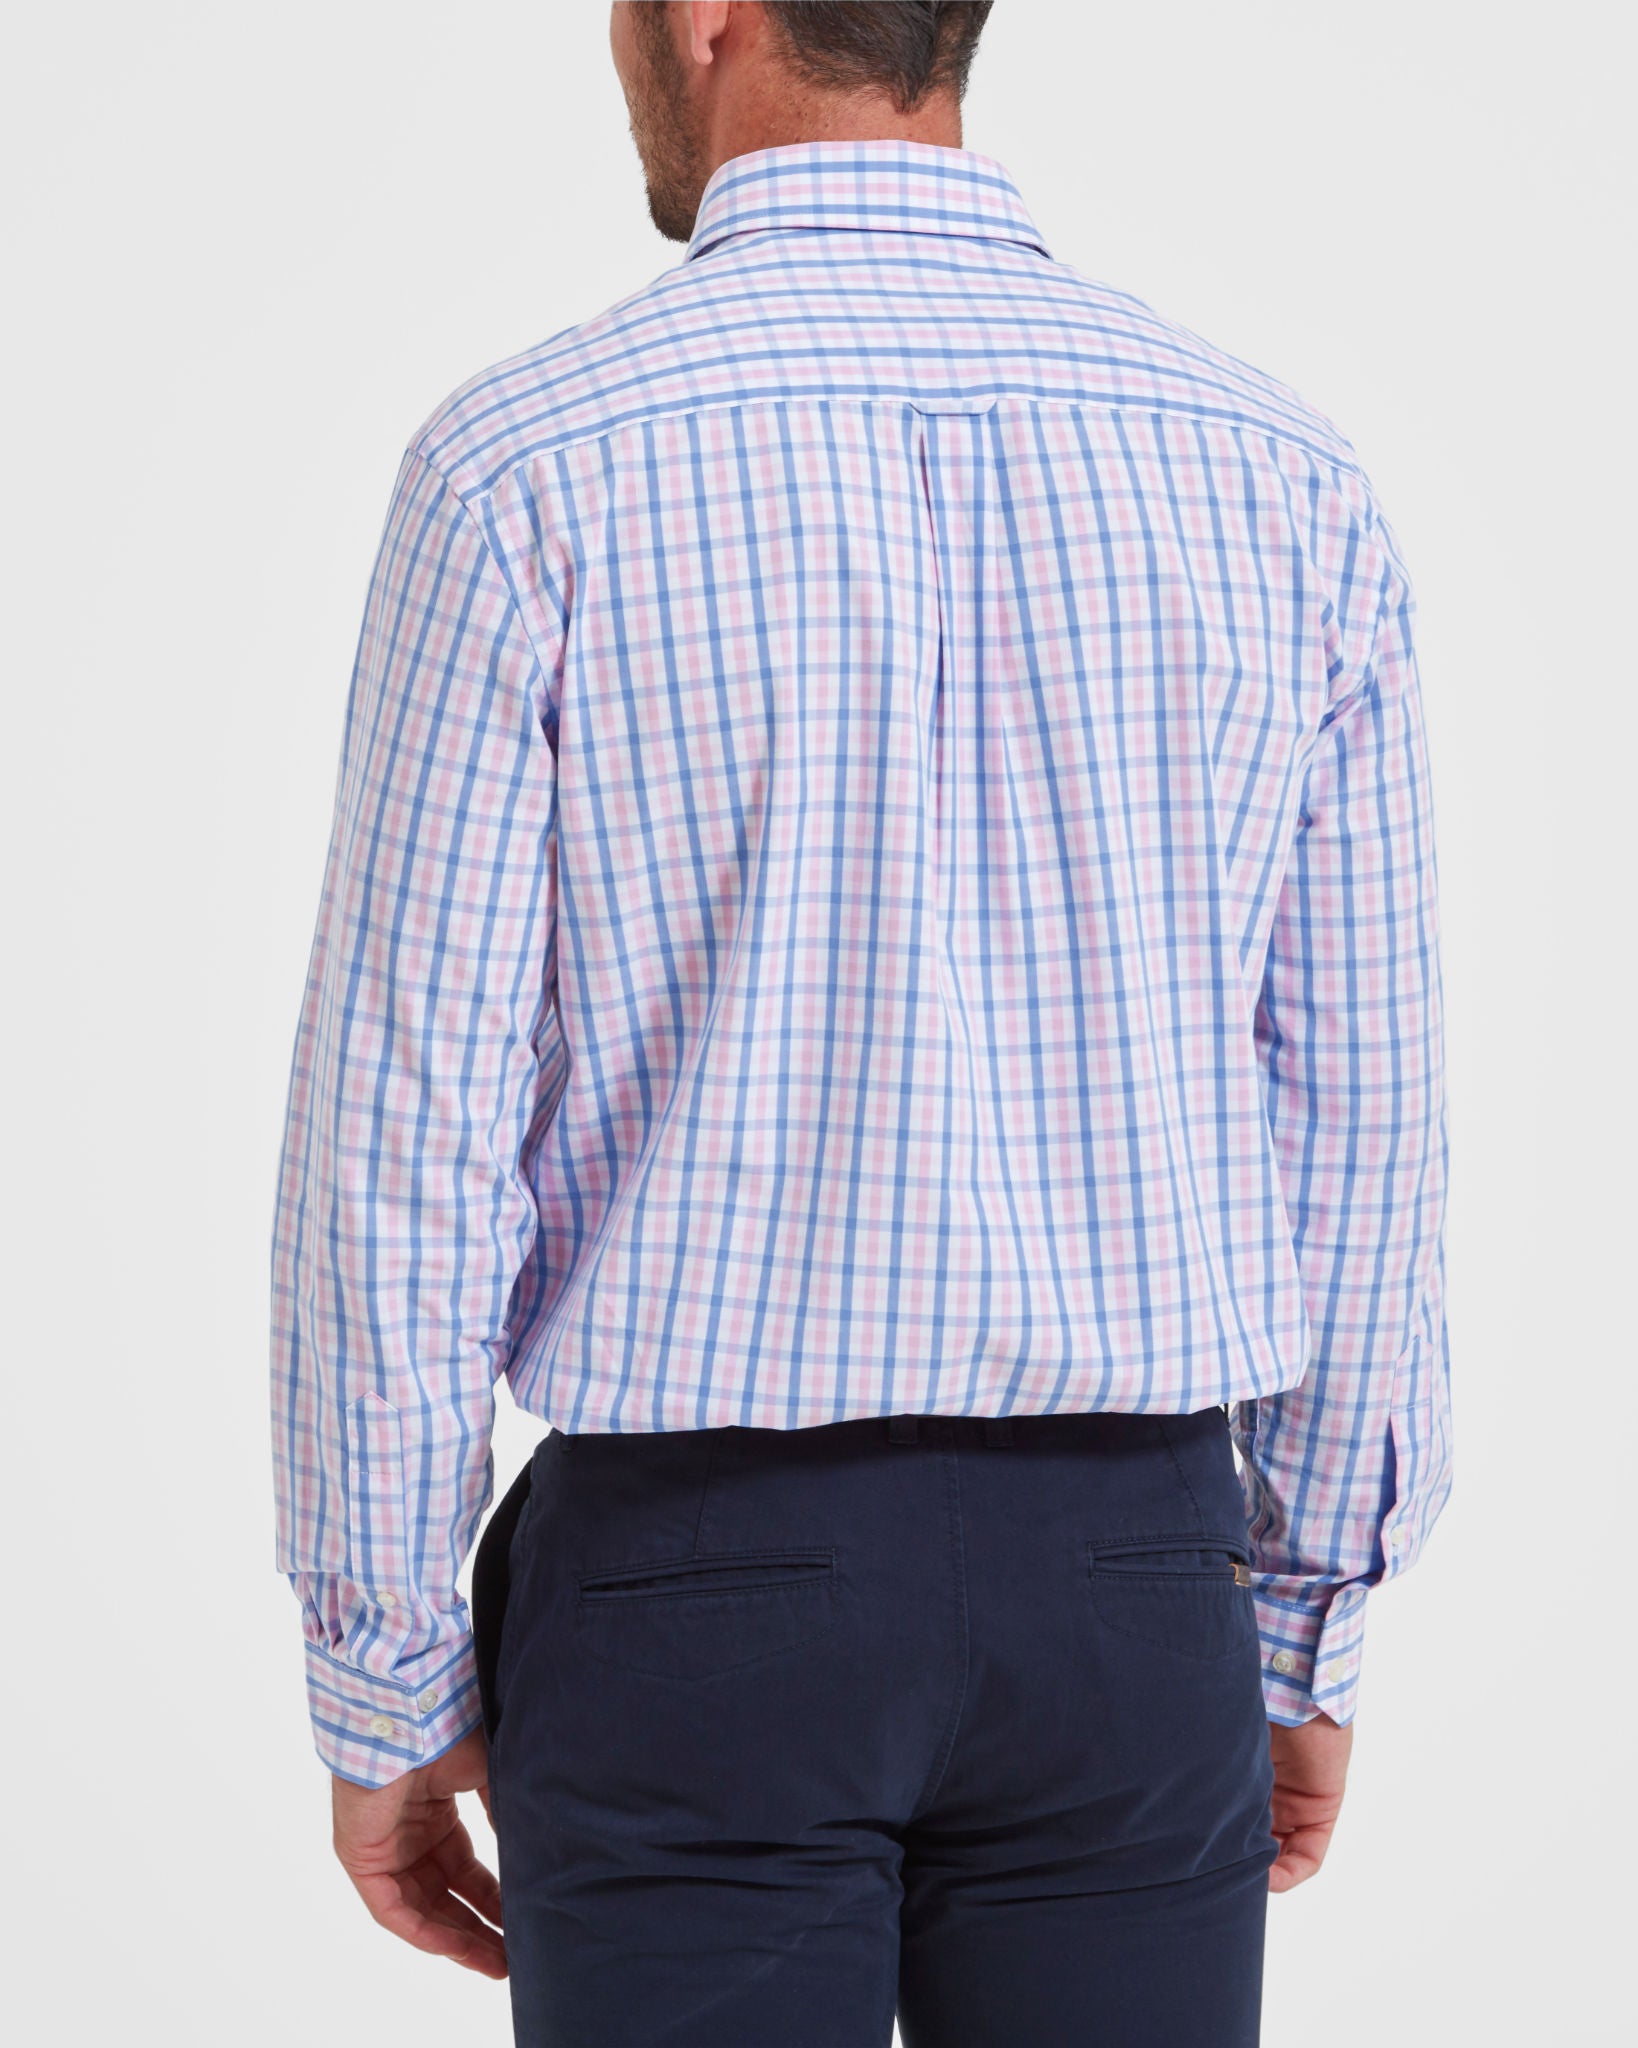 Hebden Tailored Shirt - Blue/Pink Check